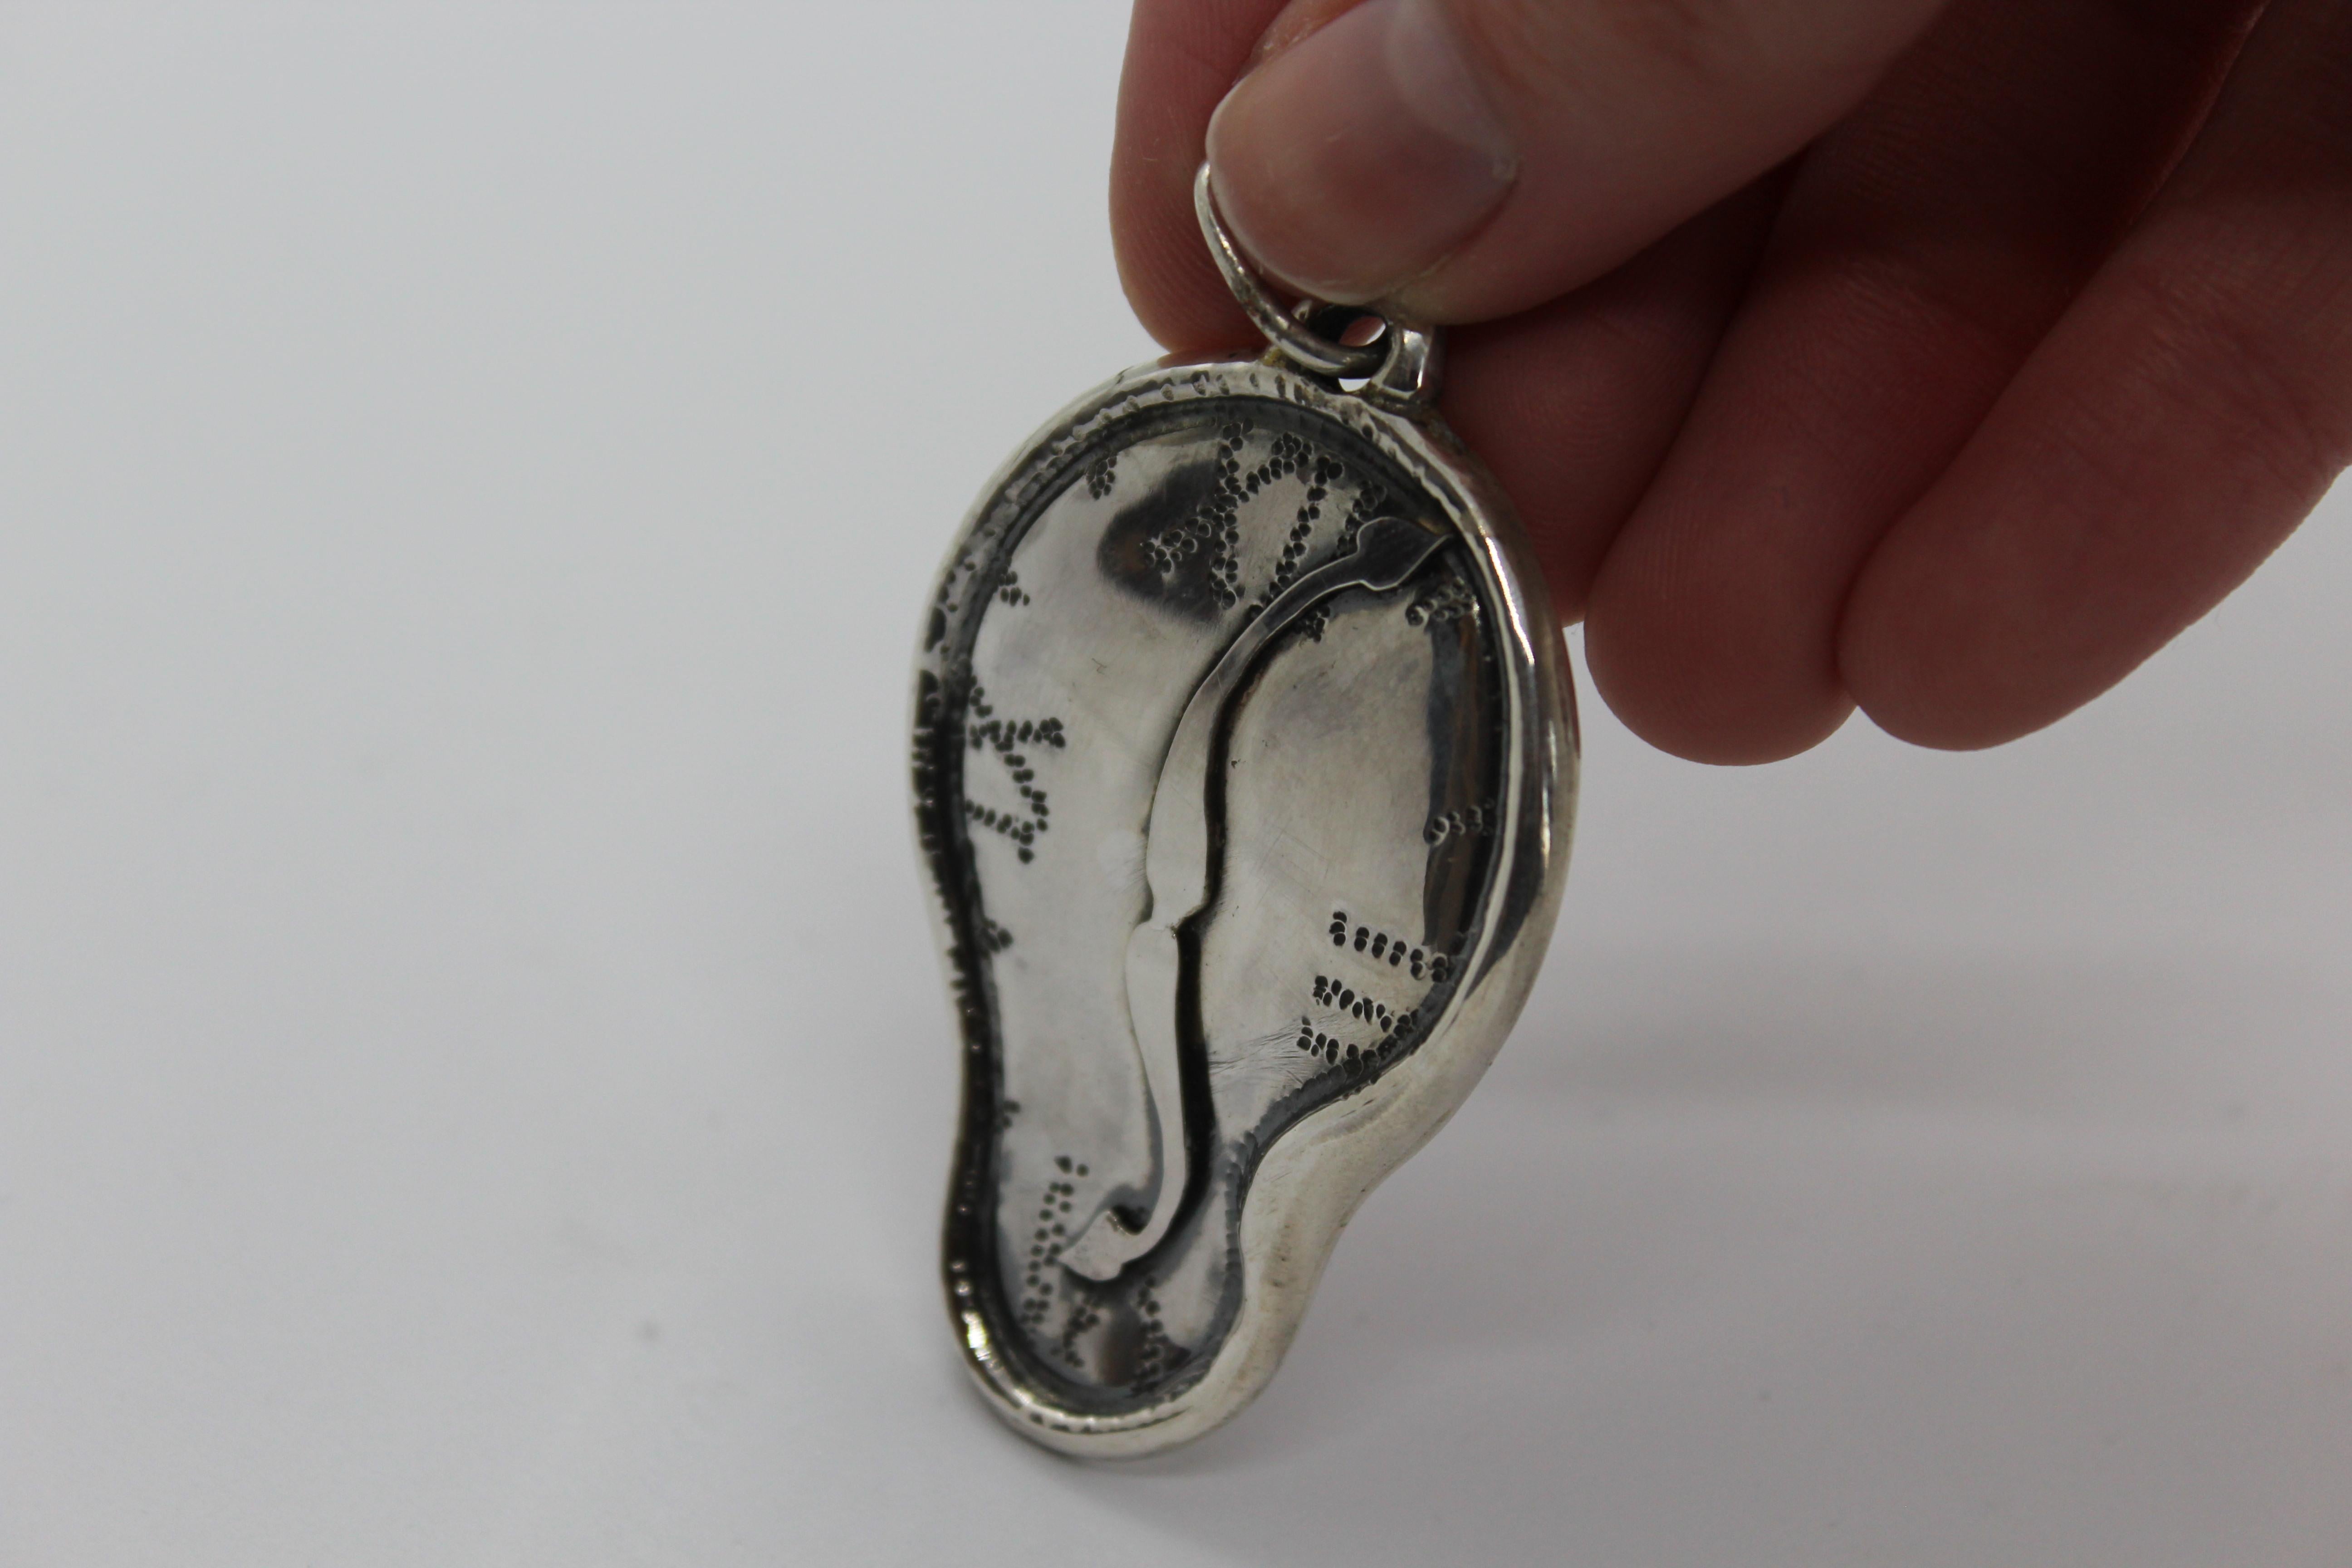 The “Dalí” pendant is part of our jewelry line “Homage to the ancestors”, inspired by famous oeuvres of great artists. Specifically, this pendant represents the well- known painting “The persistence of Memory” by Dalí. All our sterling silver pieces